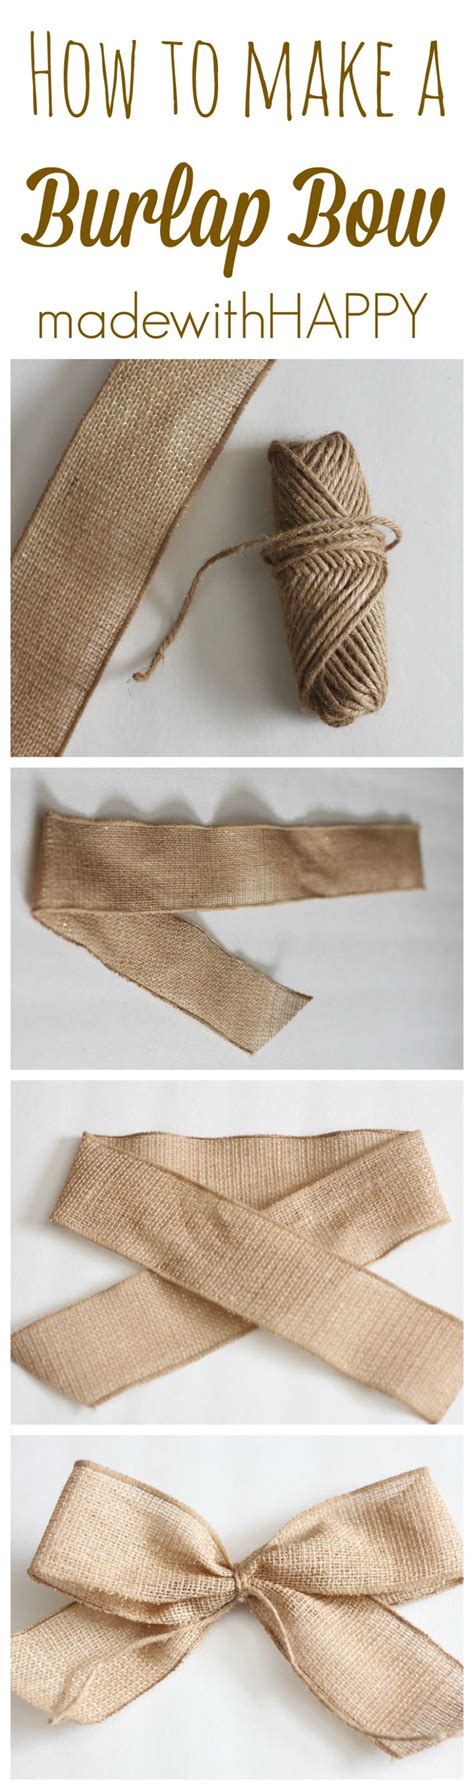 How To Make A Burlap Bow Made With Happy Burlap Projects Burlap